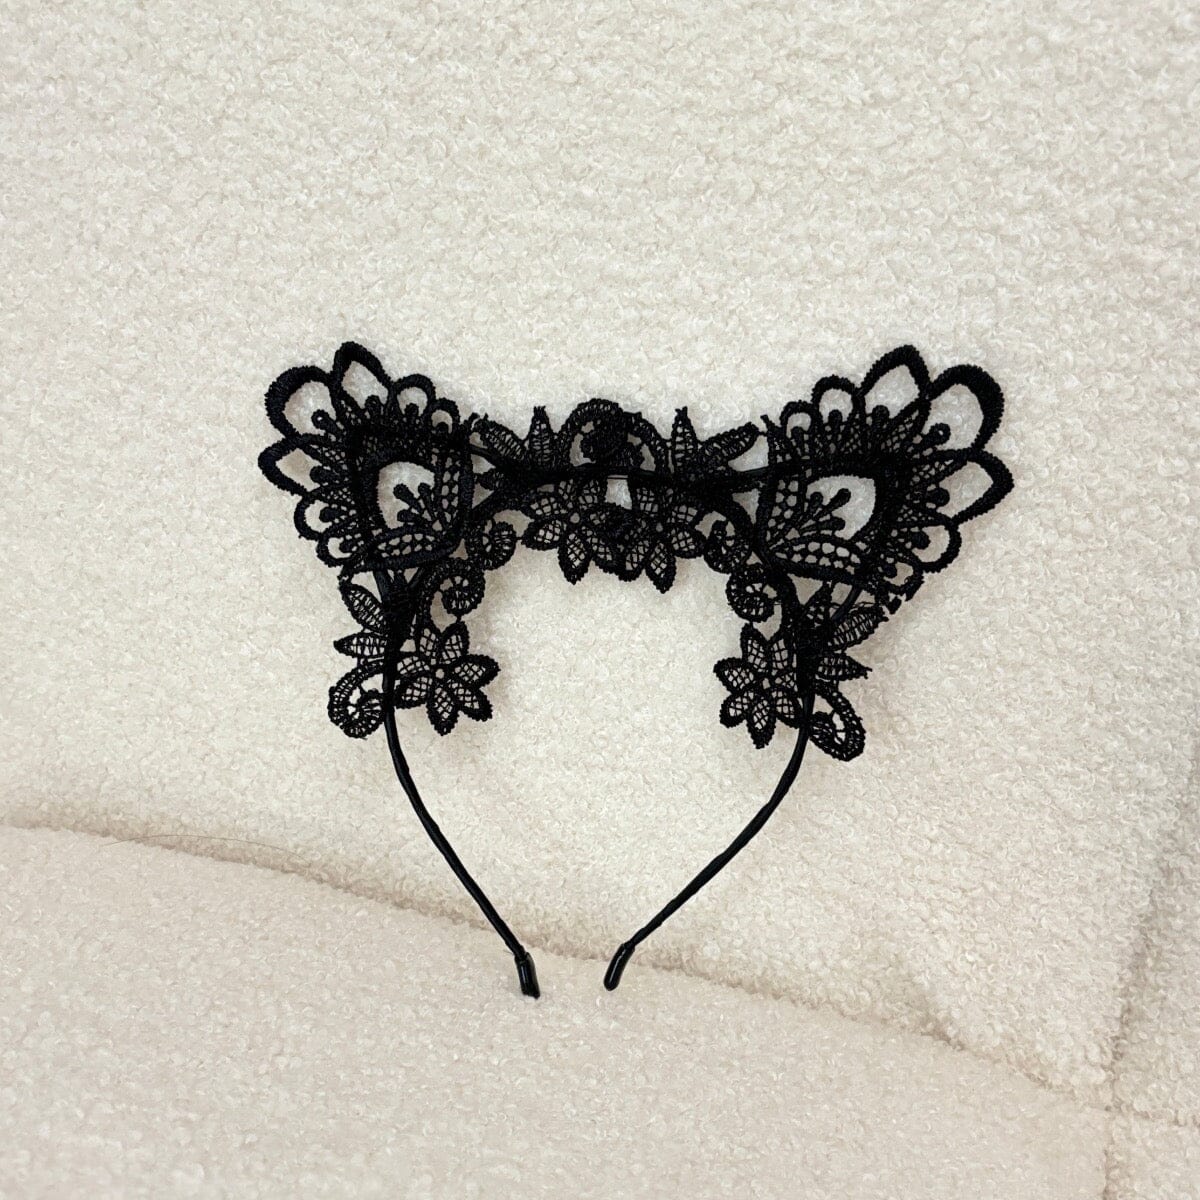 Lace bunny ears headband Accessories LOVEFREYA Free size Black Lace